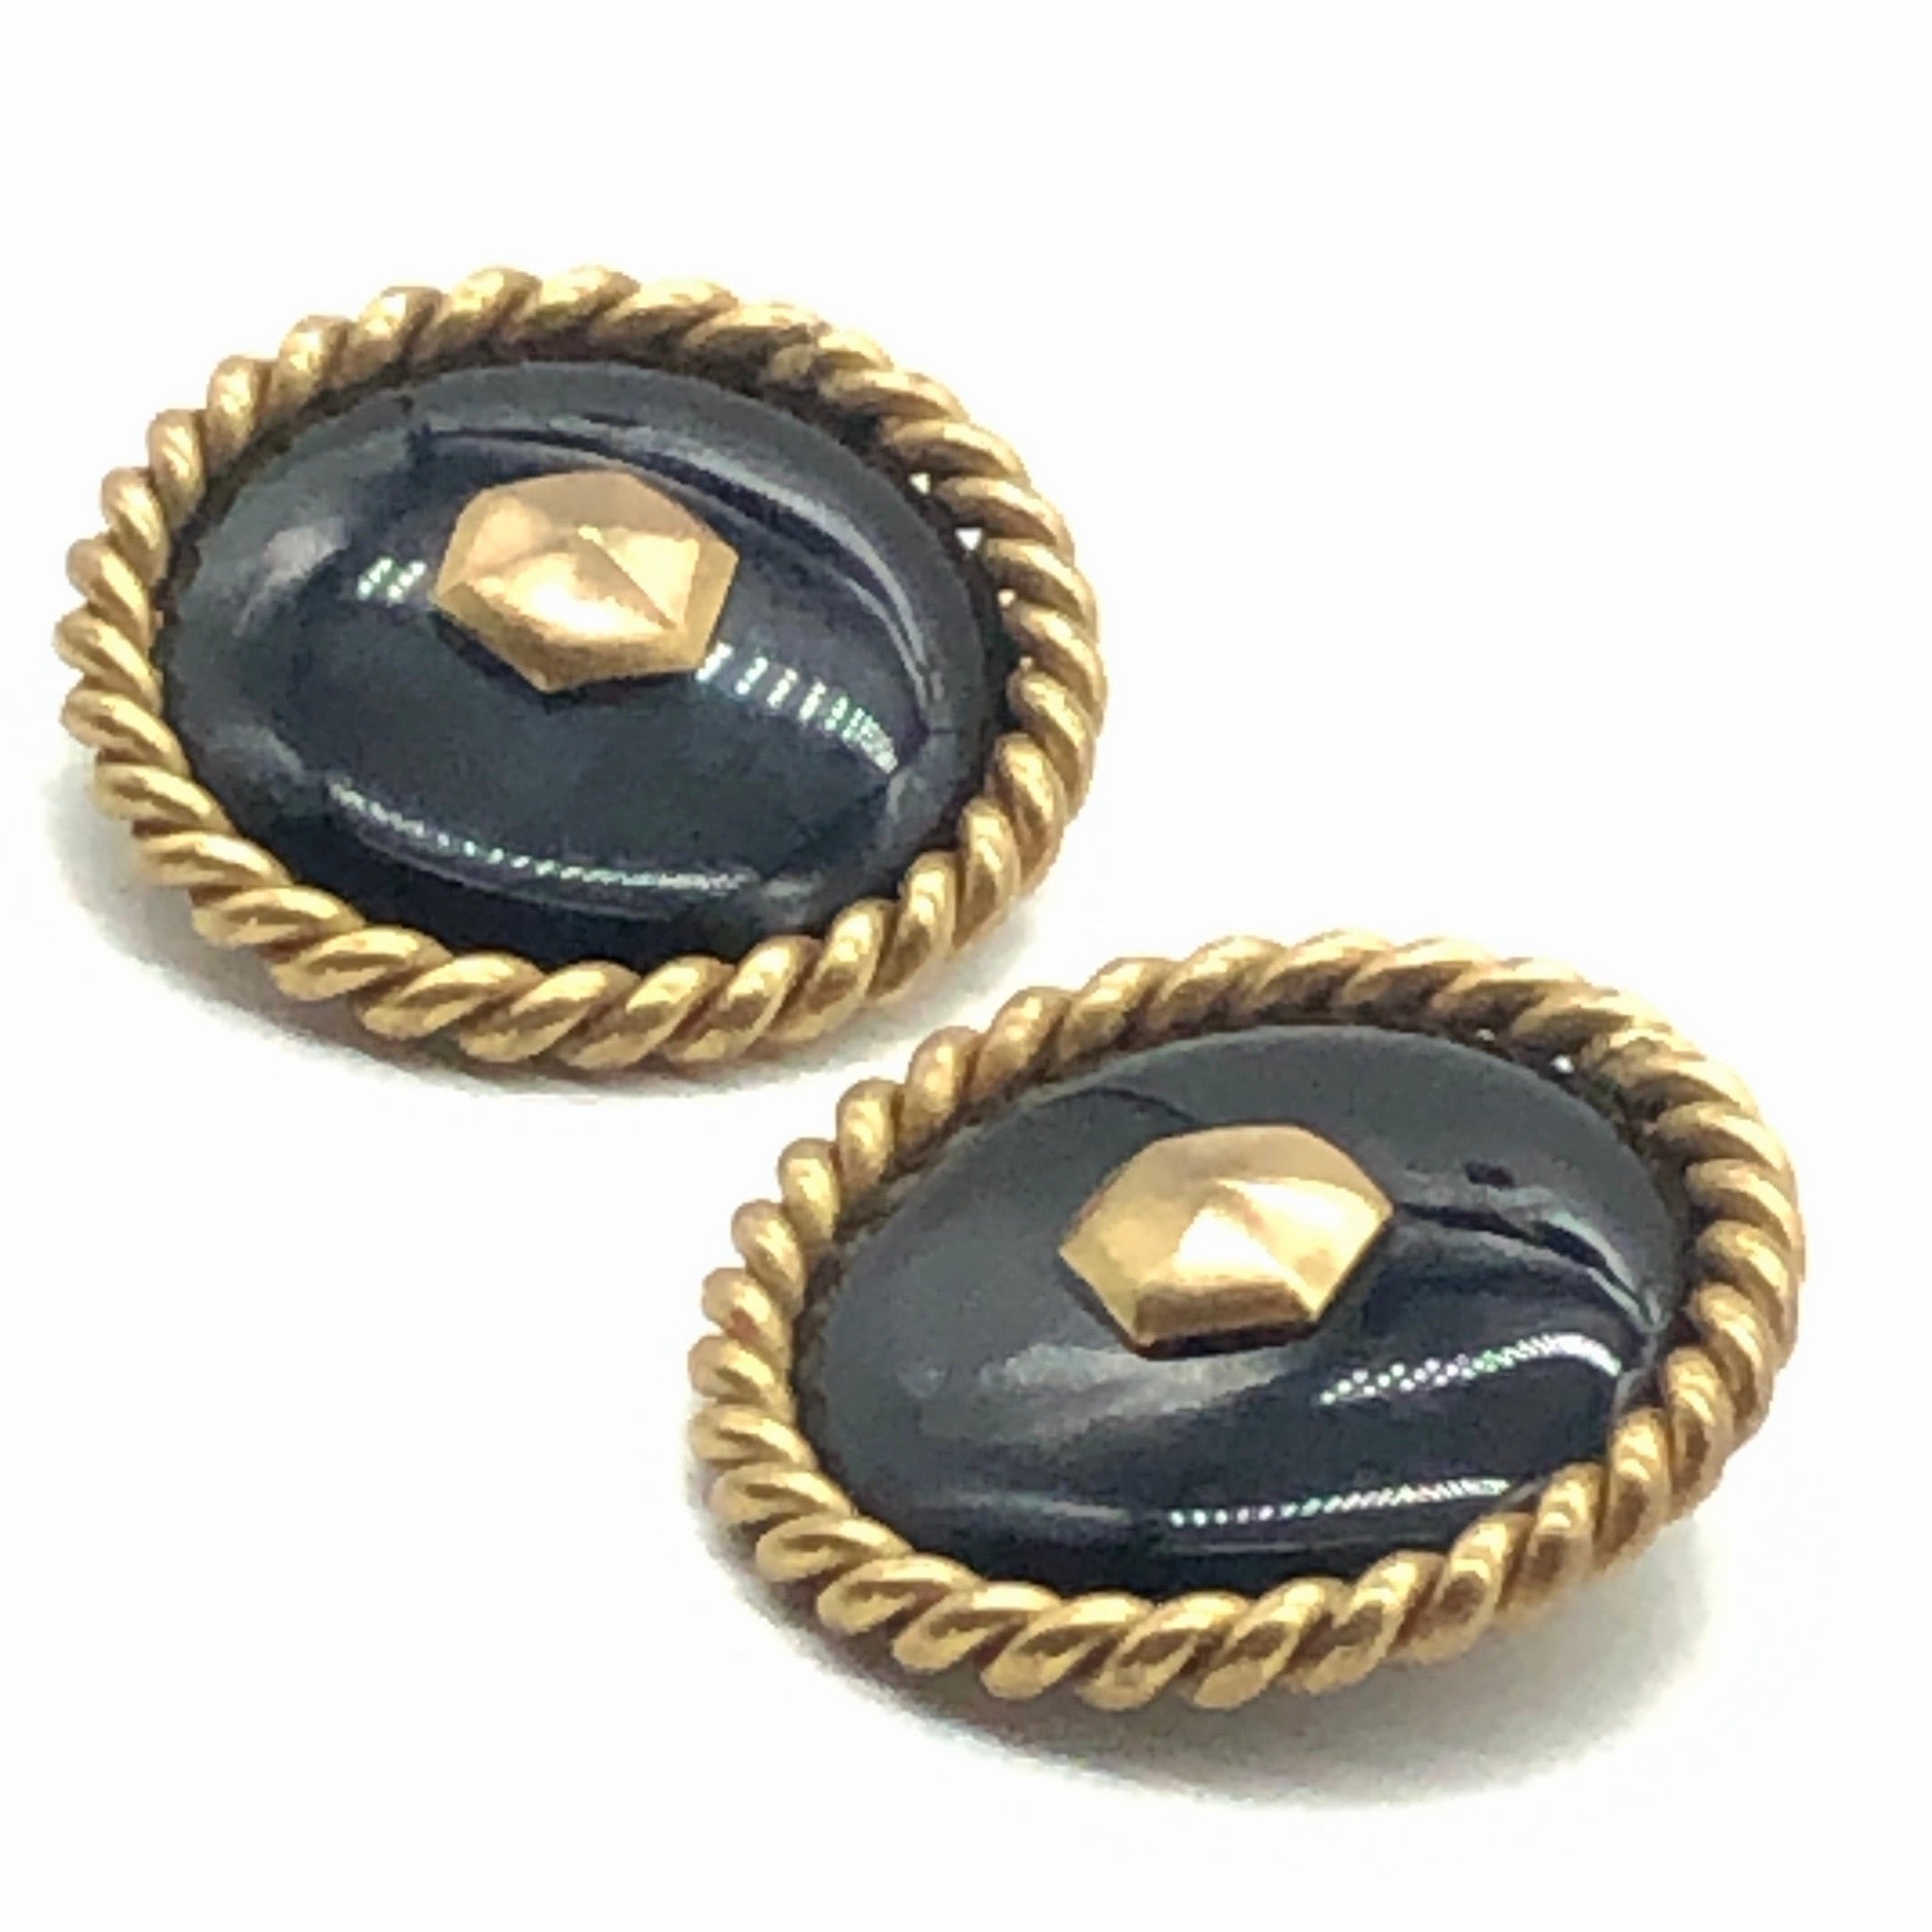 Vintage Chanel Large Black and Gold Earrings – Very Vintage